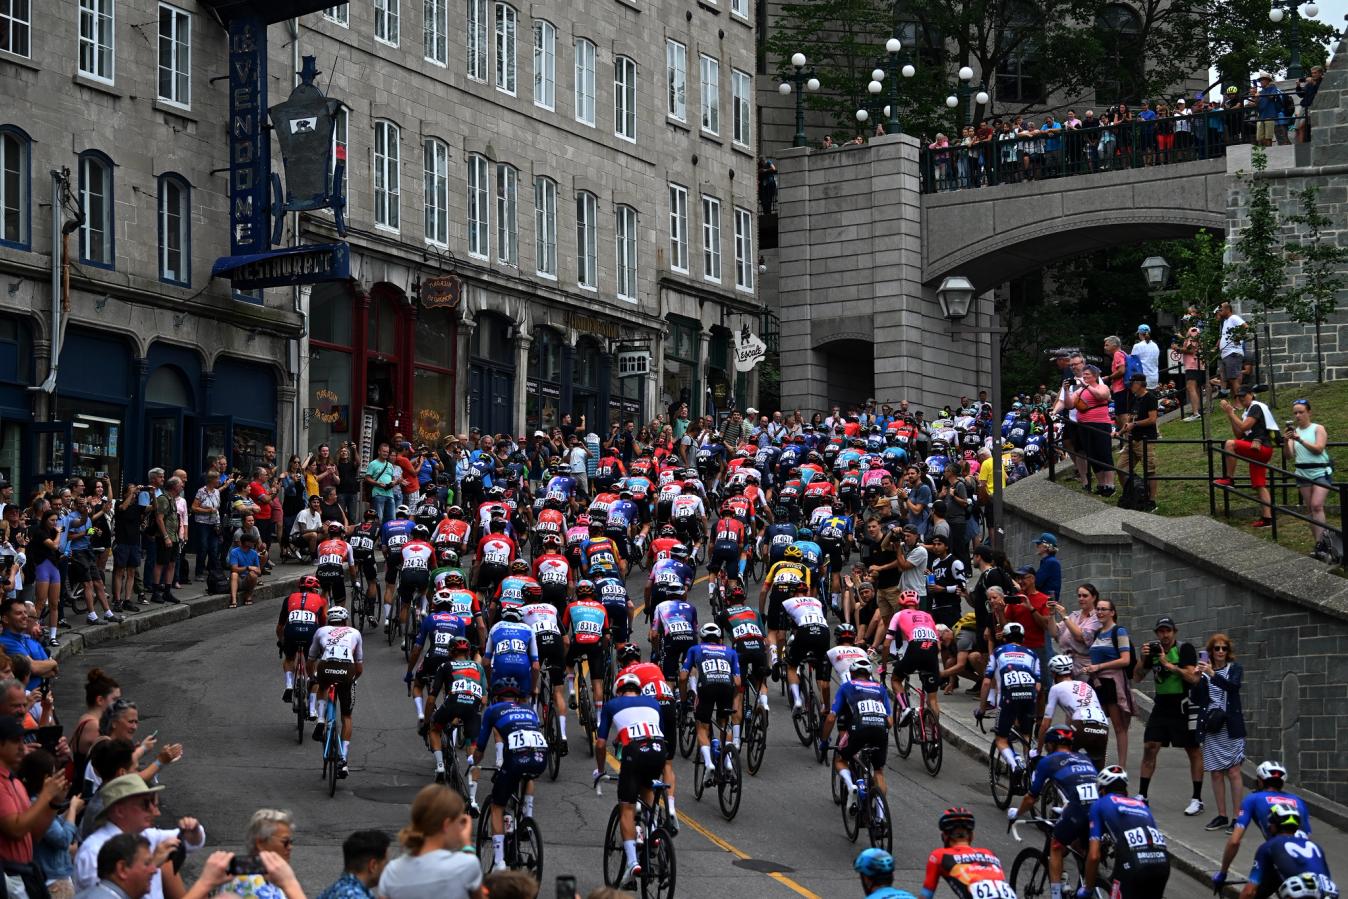 The peloton ascending the steep ramp up from the Saint Lawrence river in Quebec City